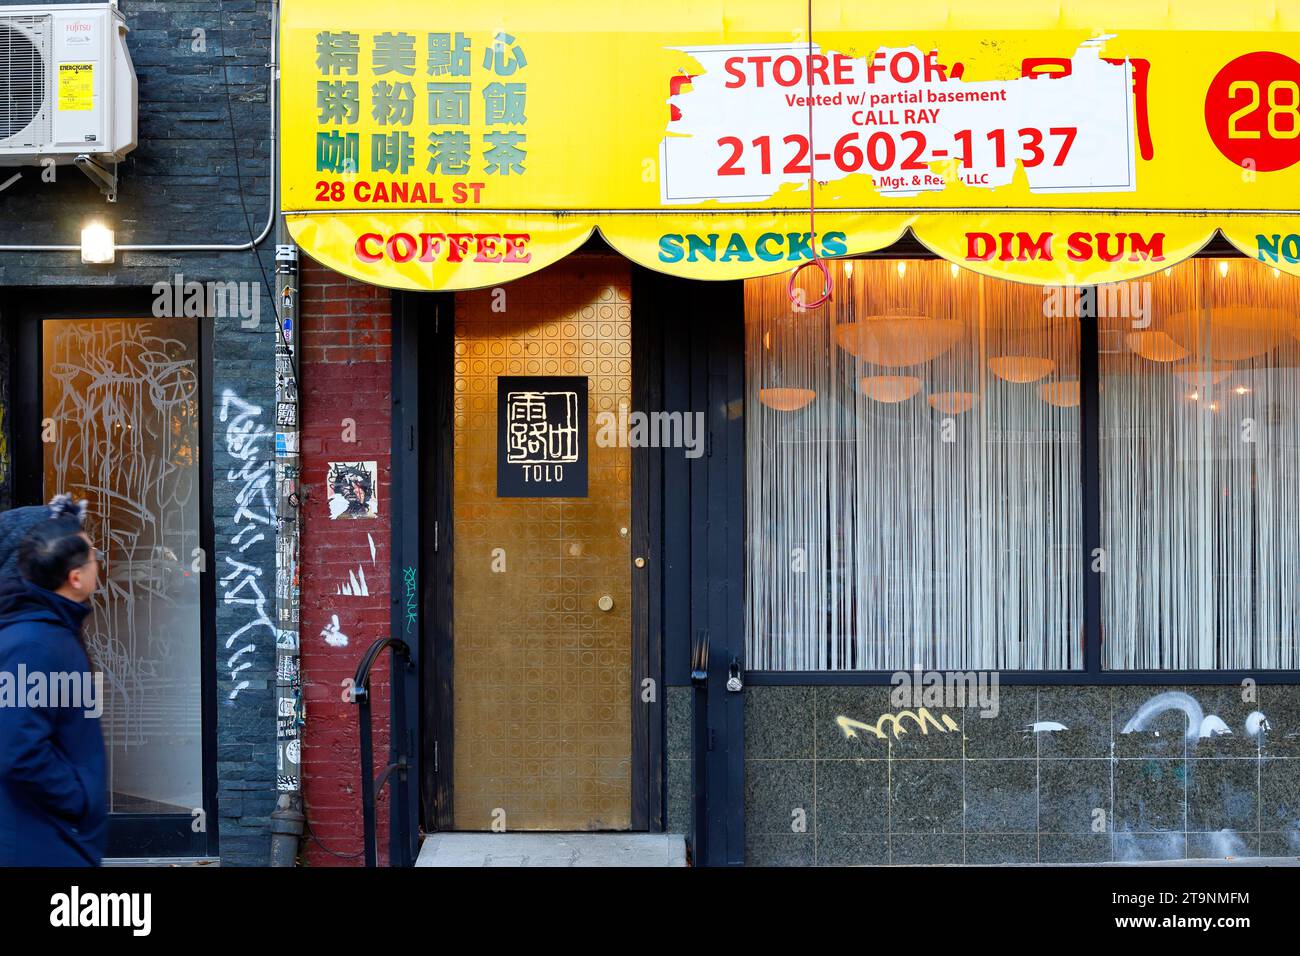 Tolo, 28 Canal St, New York, NYC storefront photo of a Chinese American restaurant and wine bar in Manhattan's Lower East Side. Stock Photo